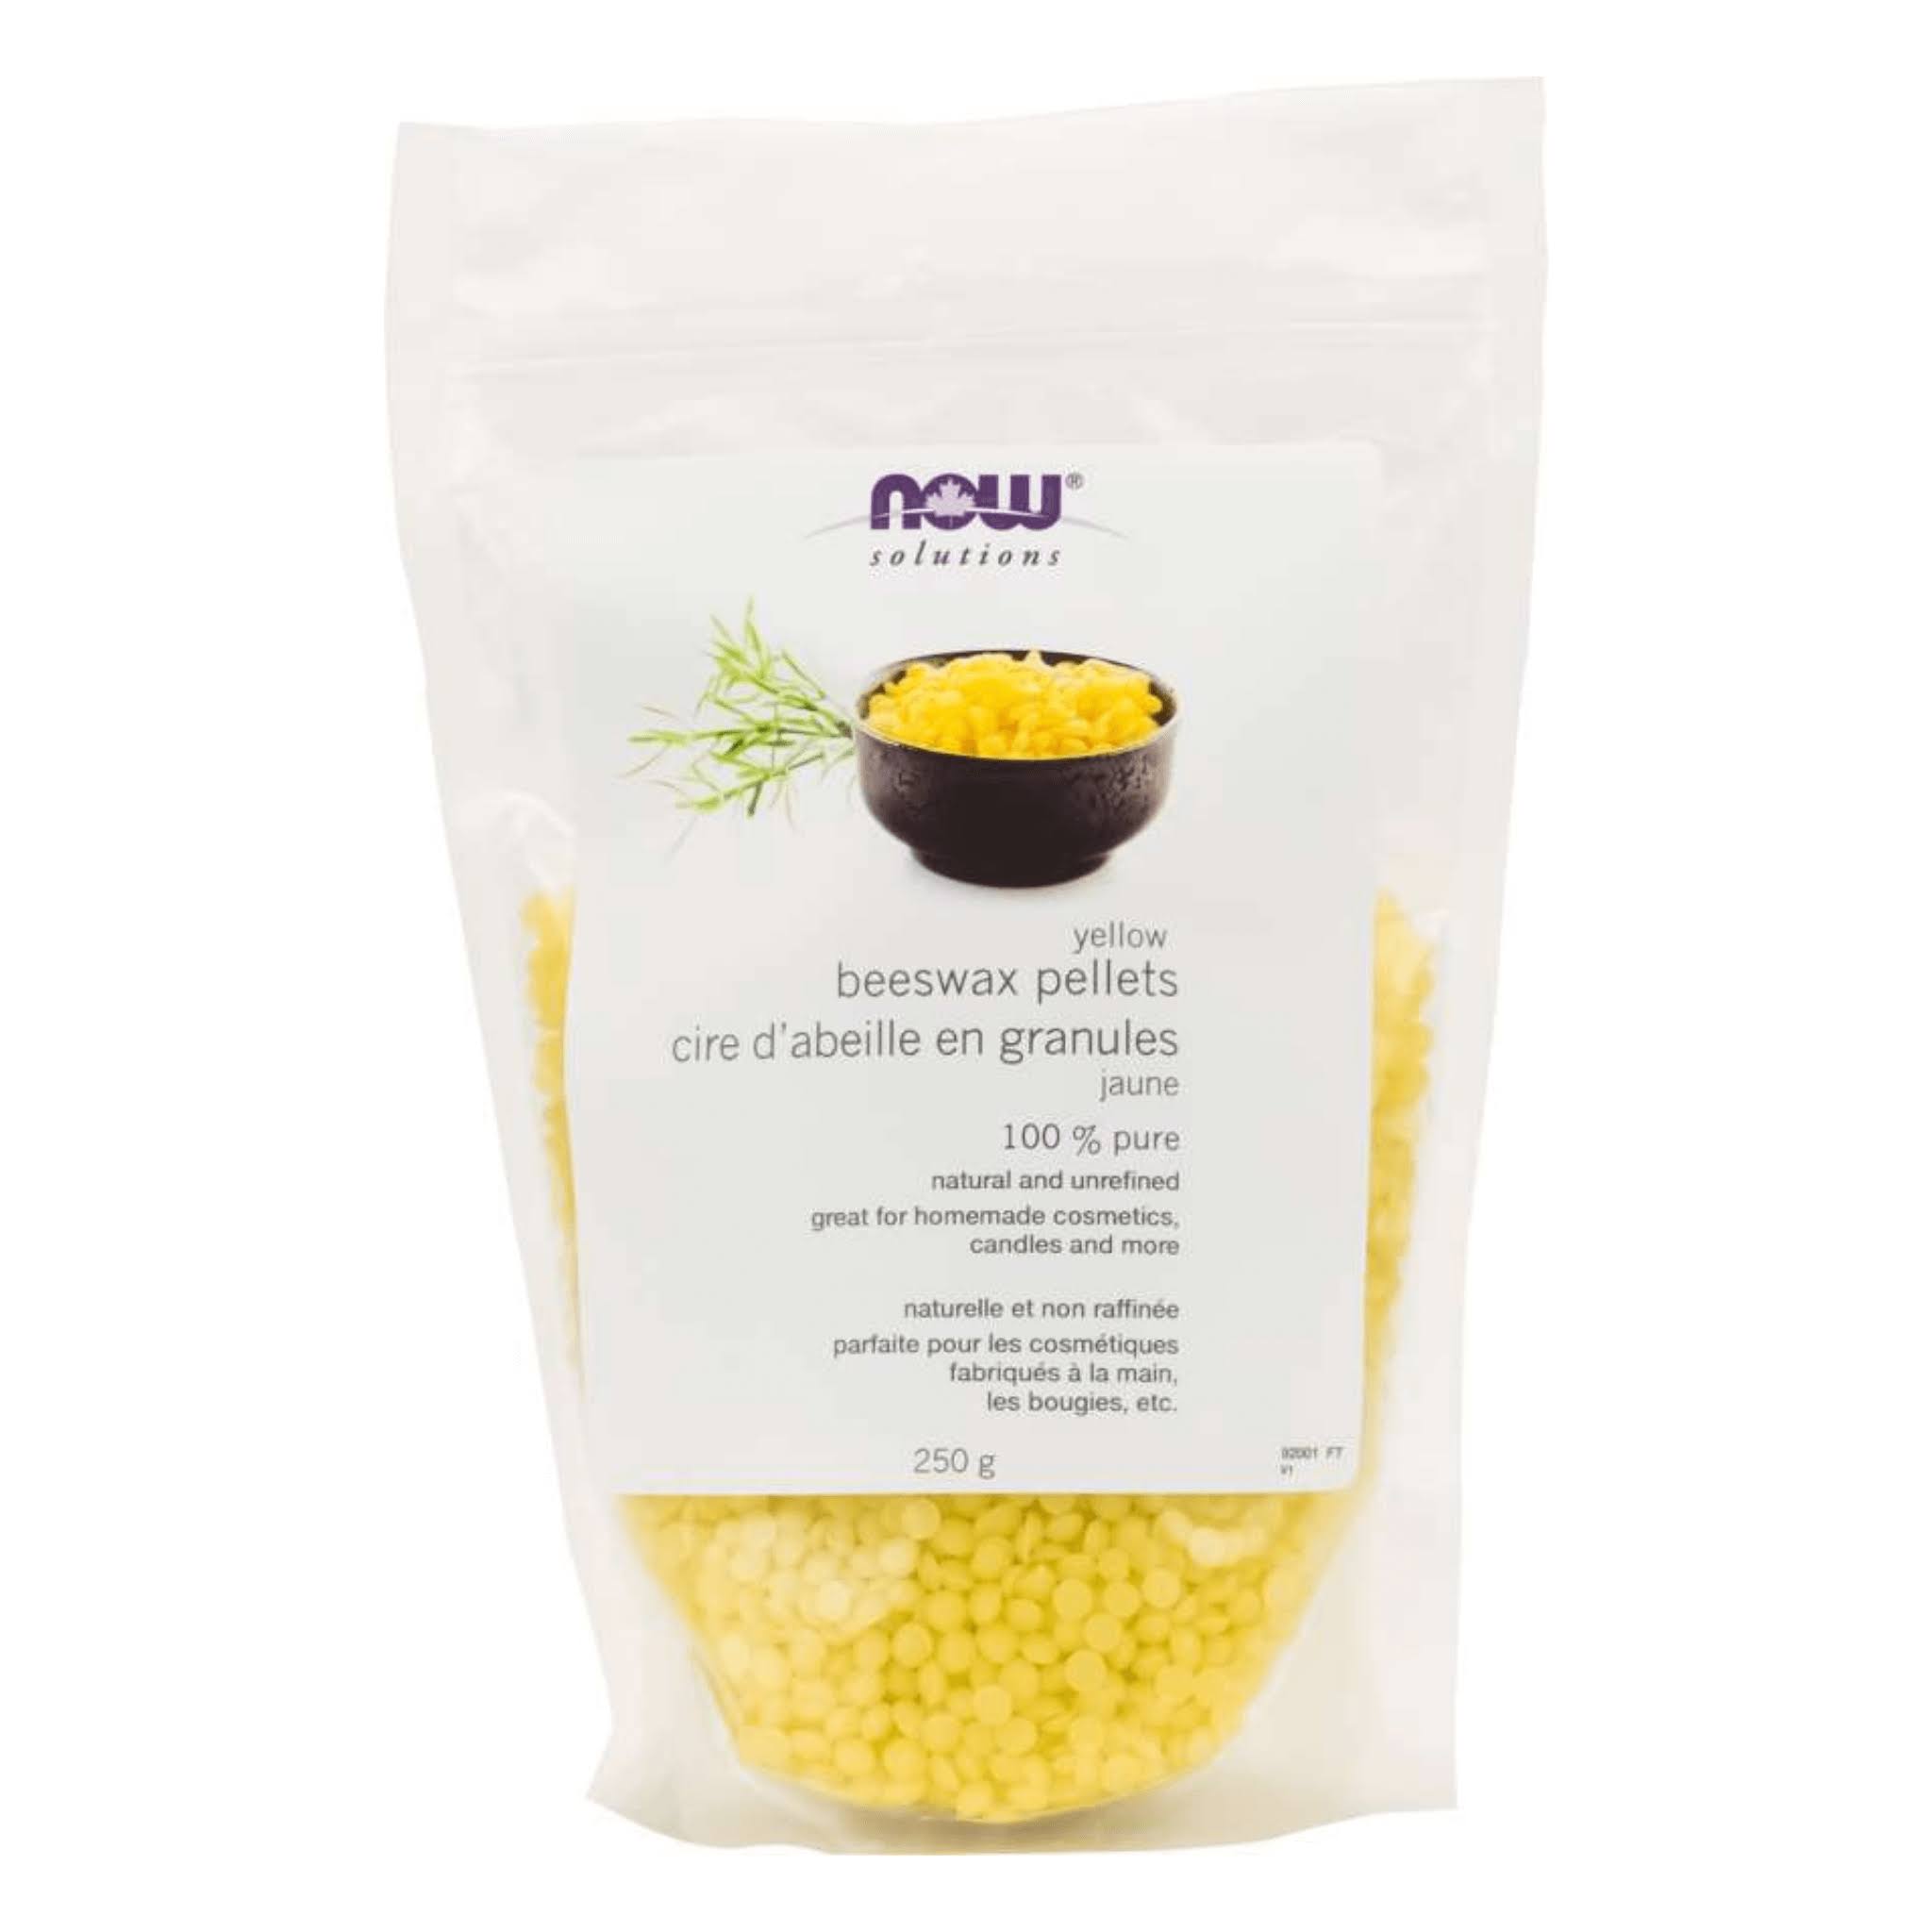 Now Yellow Beeswax Pellets 250 Grams